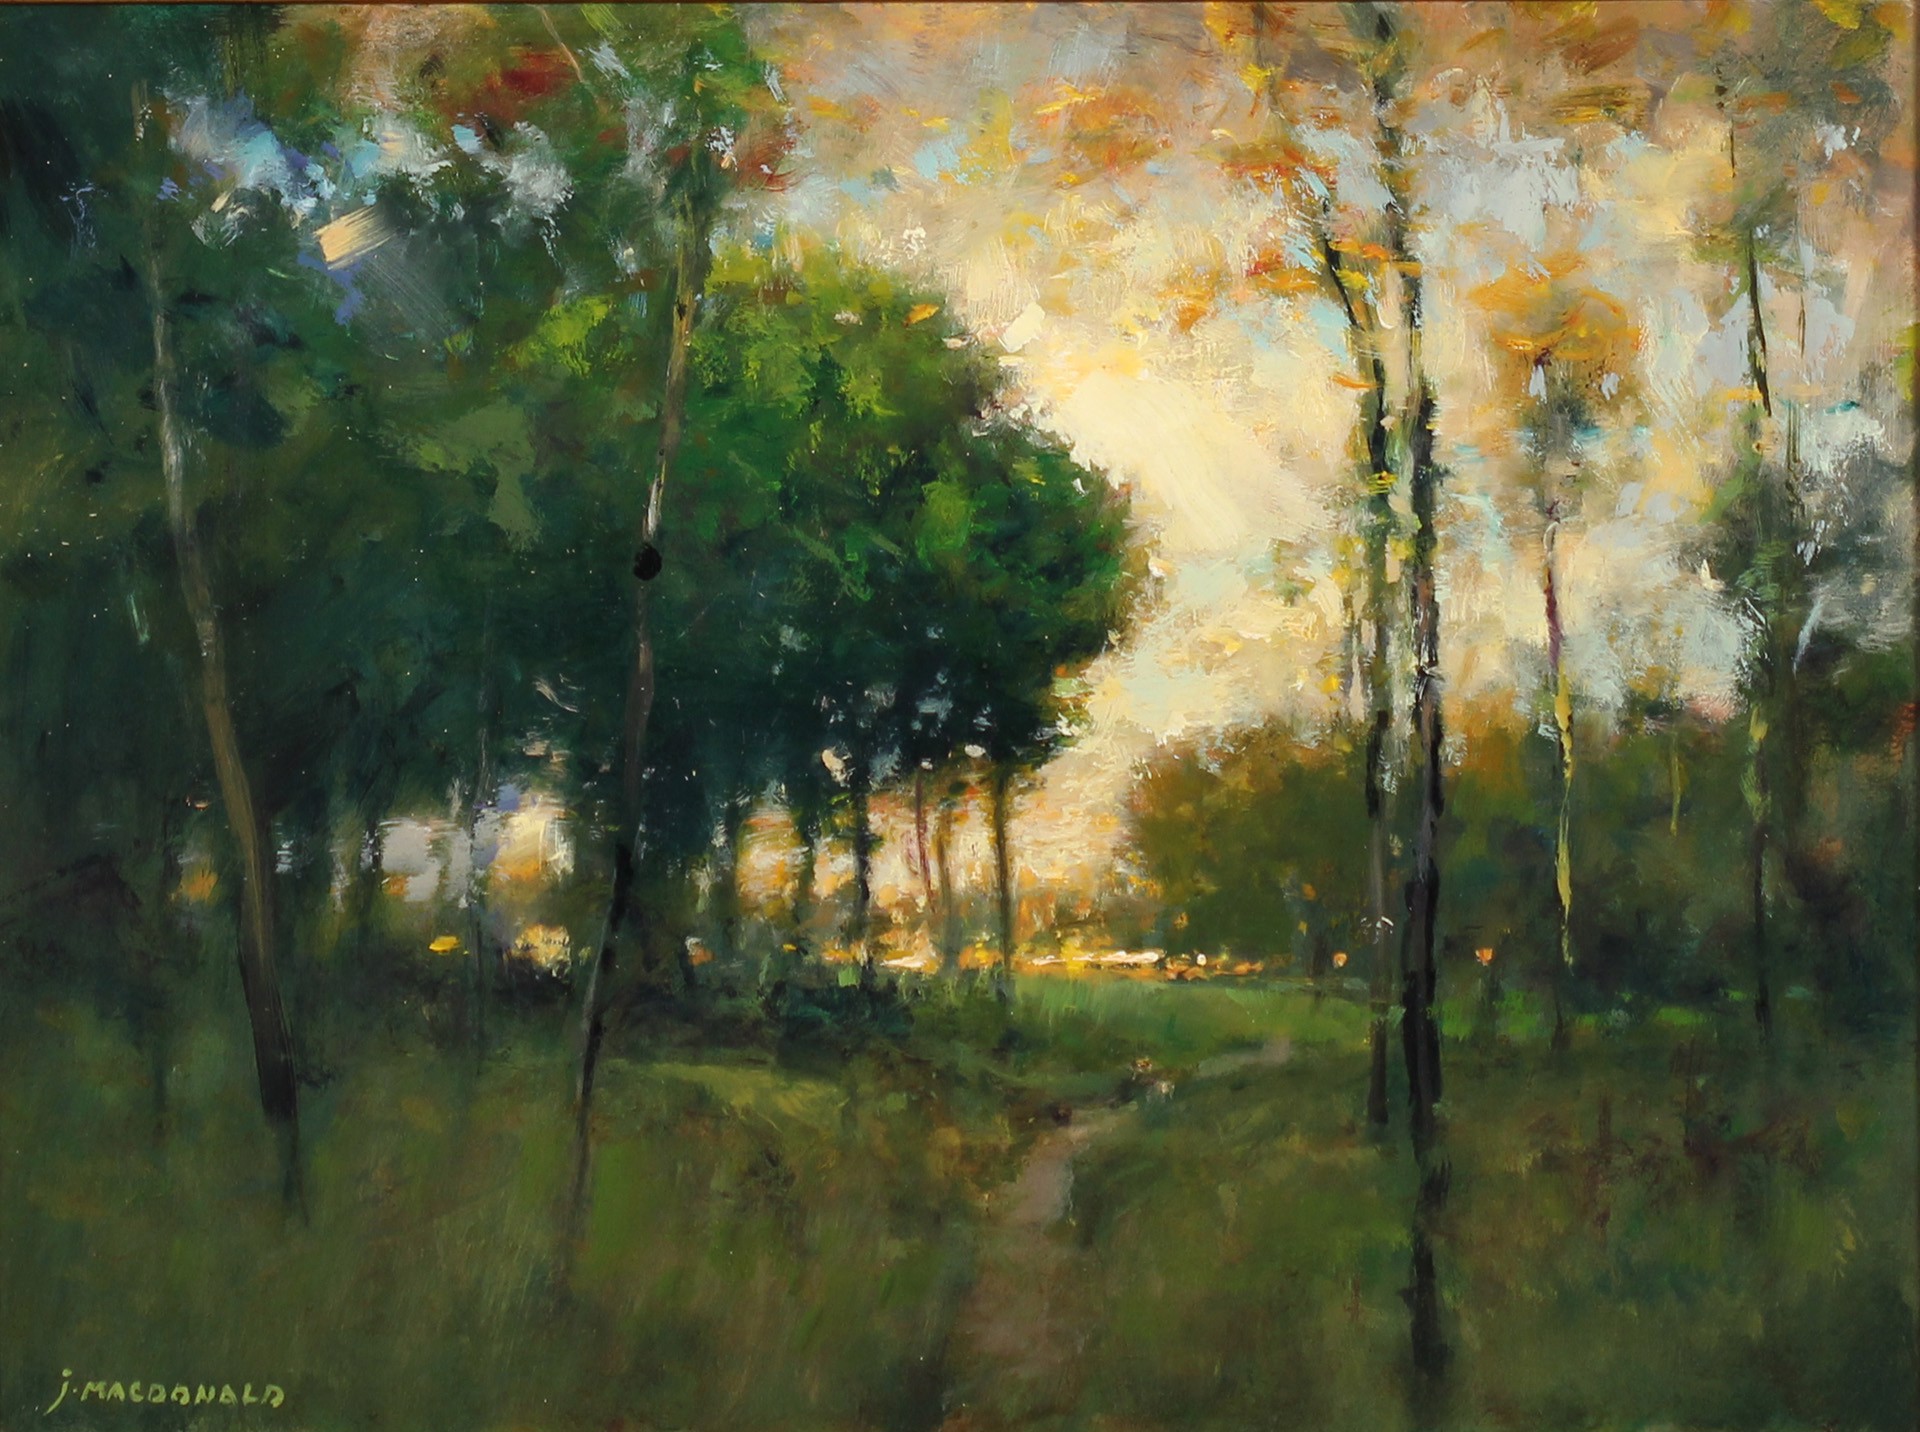 Homage to George Inness by John MacDonald